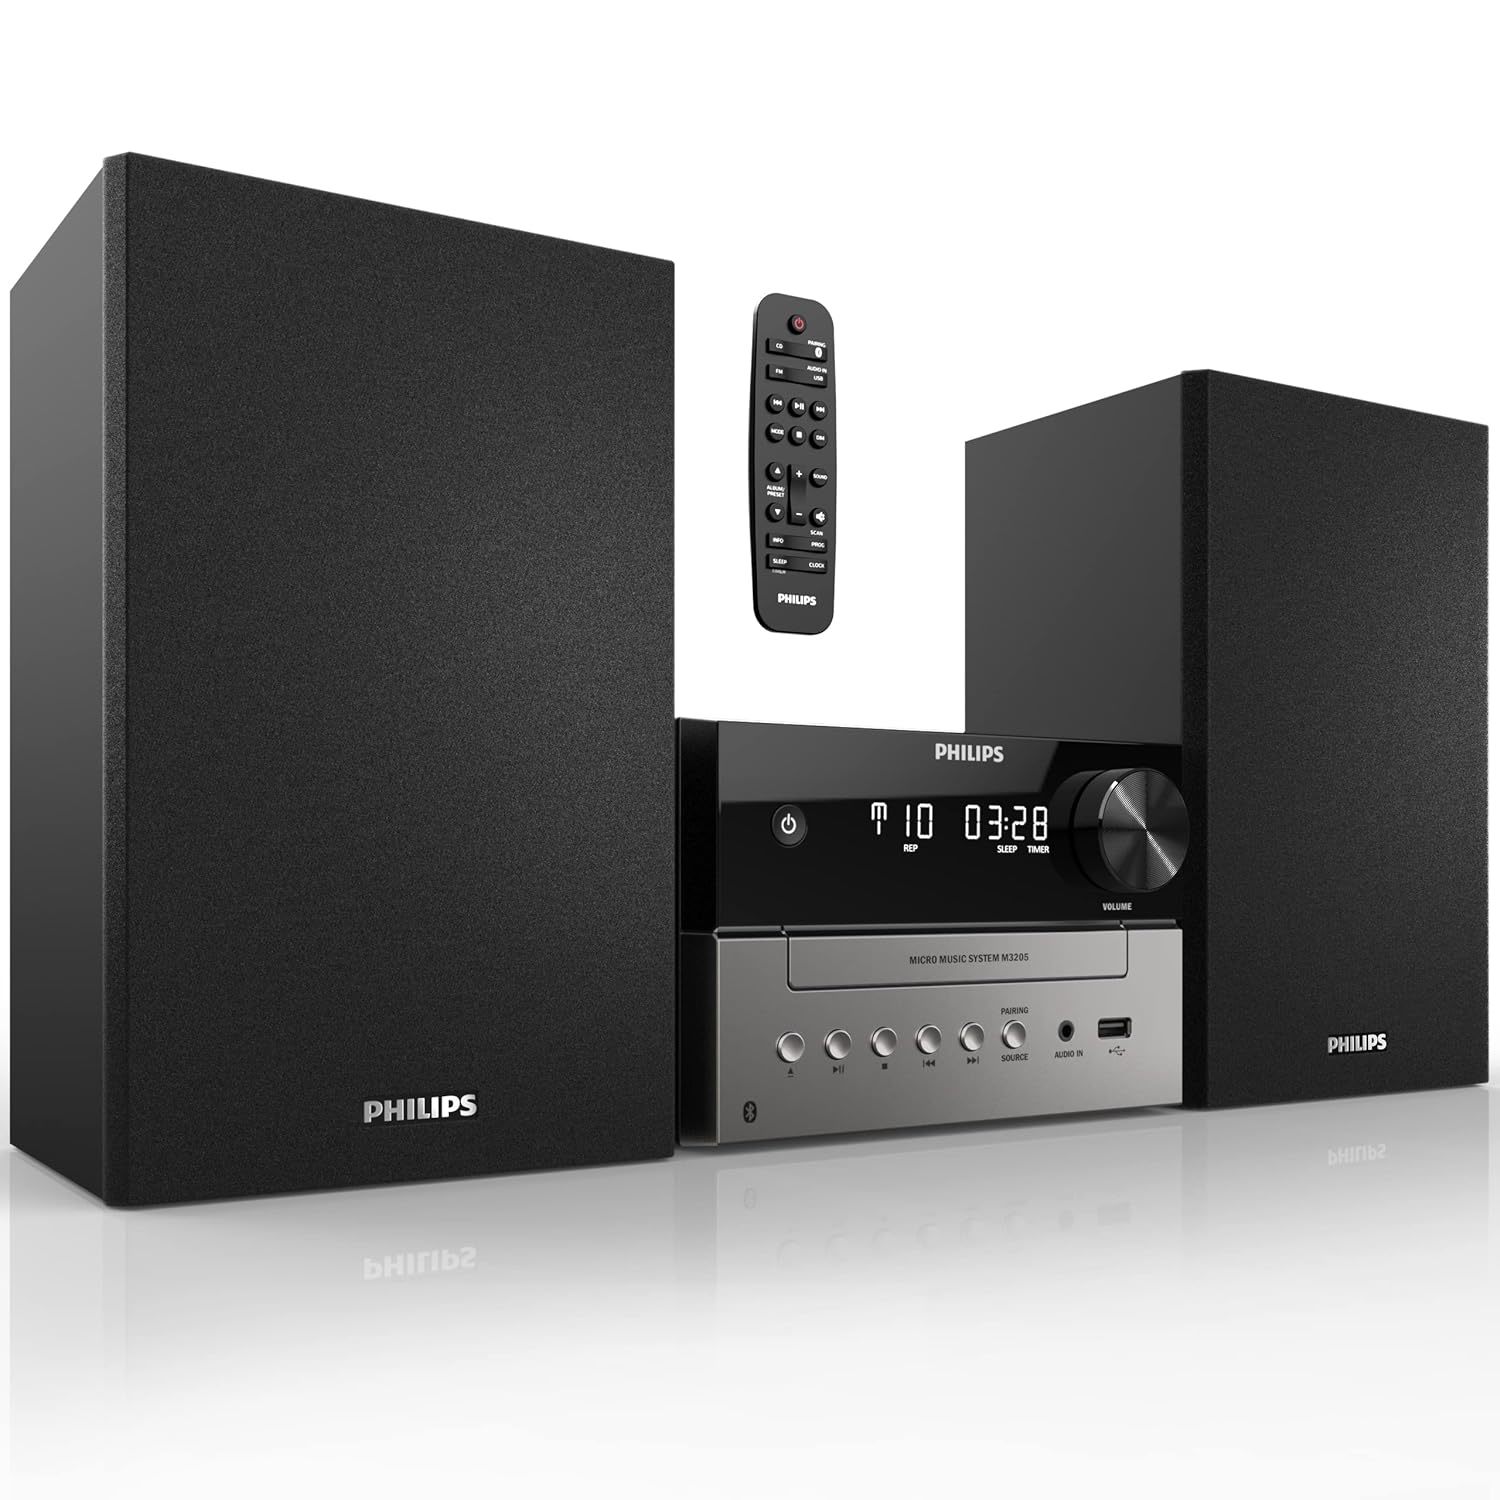 Philips Bluetooth Stereo System for Home with CD Player, Wireless Streaming, MP3 - $259.99